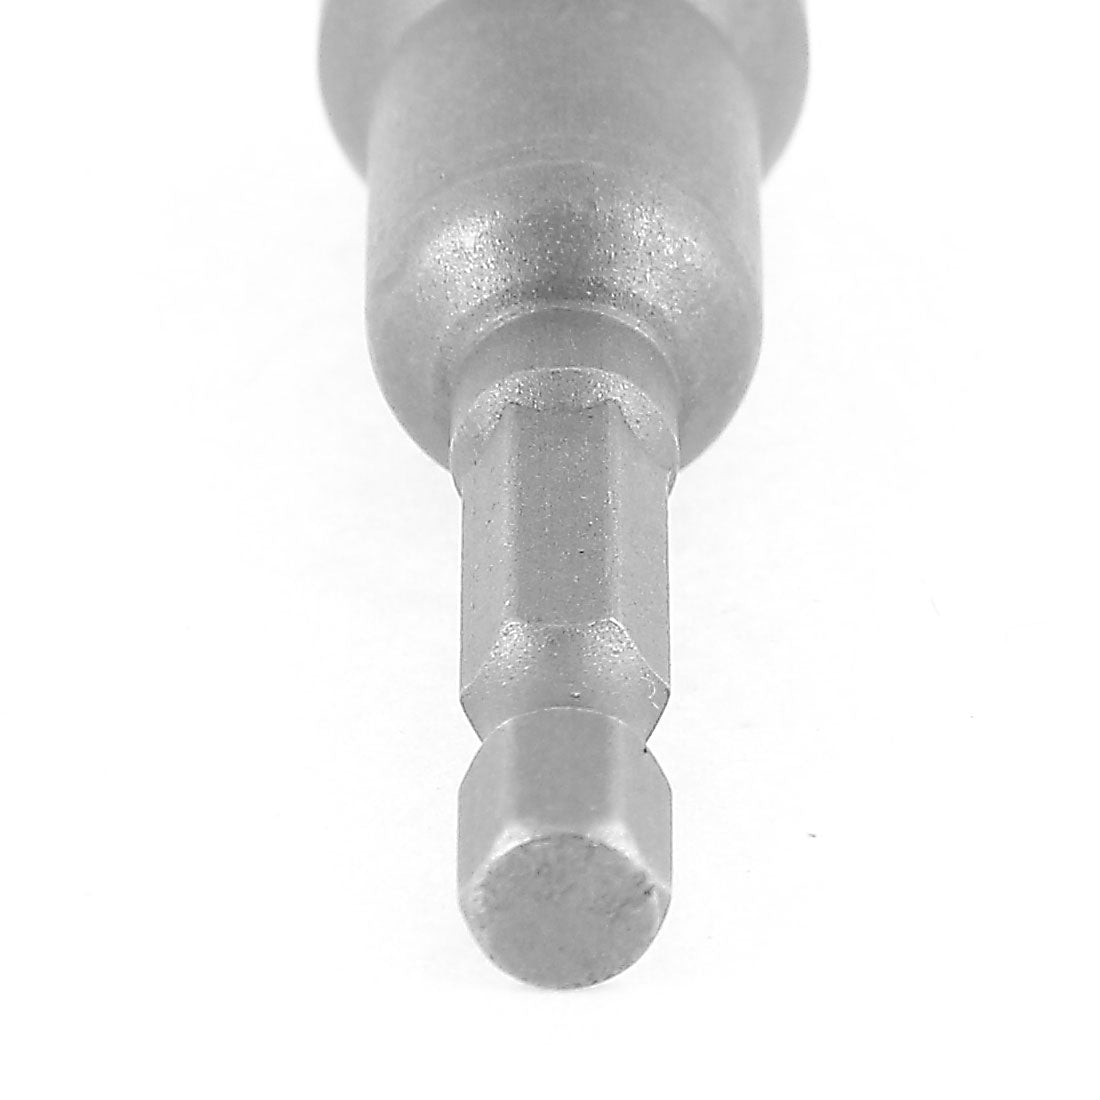 uxcell Uxcell 13mm Socket Magnetic Nut Driver Setter Adapter Hex Bit Gray